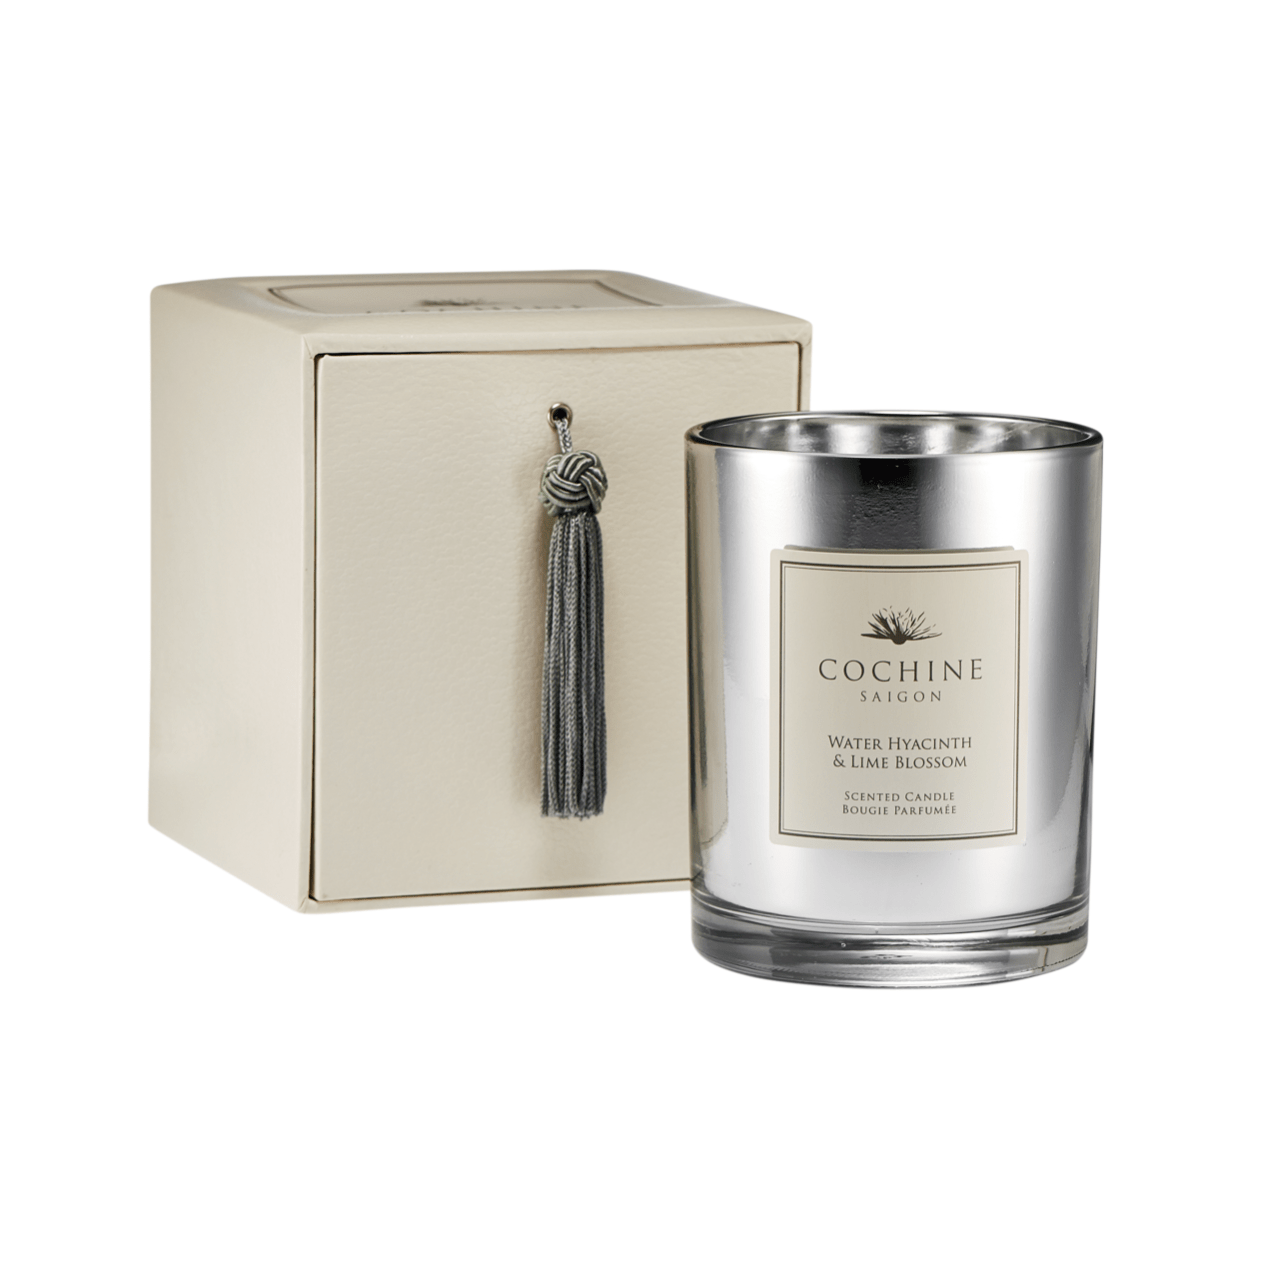 Cochine Home Fragrances of Cochines luxury scented candles and Cochine reed diffuers in Cochine Water Hyacinth & Lime Blossom Candle